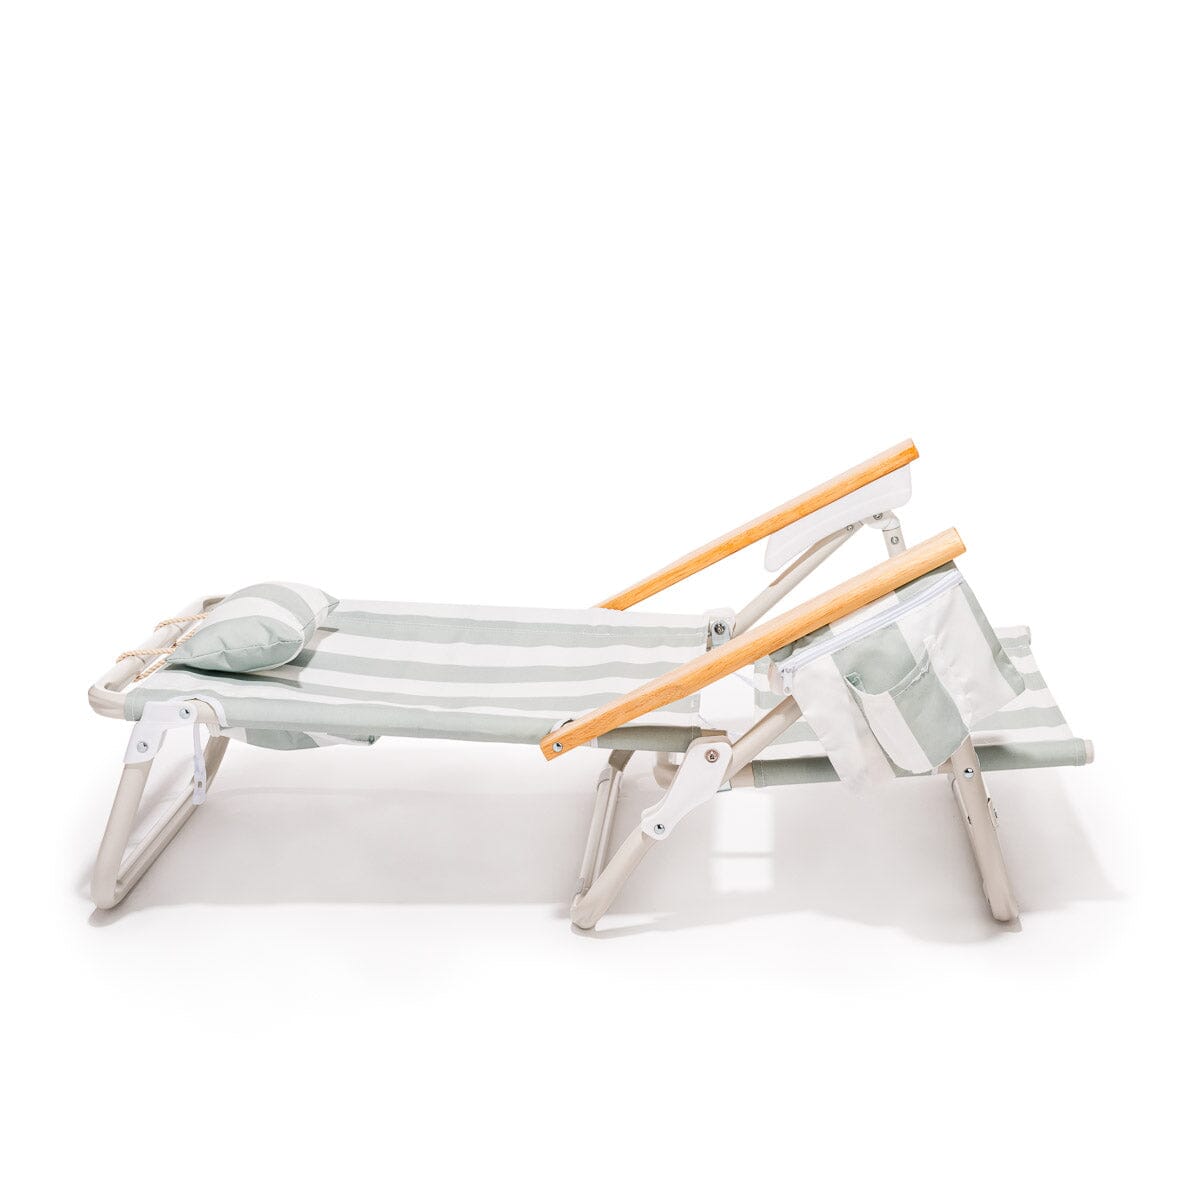 The Holiday Tommy Chair - Sage Capri Stripe Holiday Tommy Chair Business & Pleasure Co. 